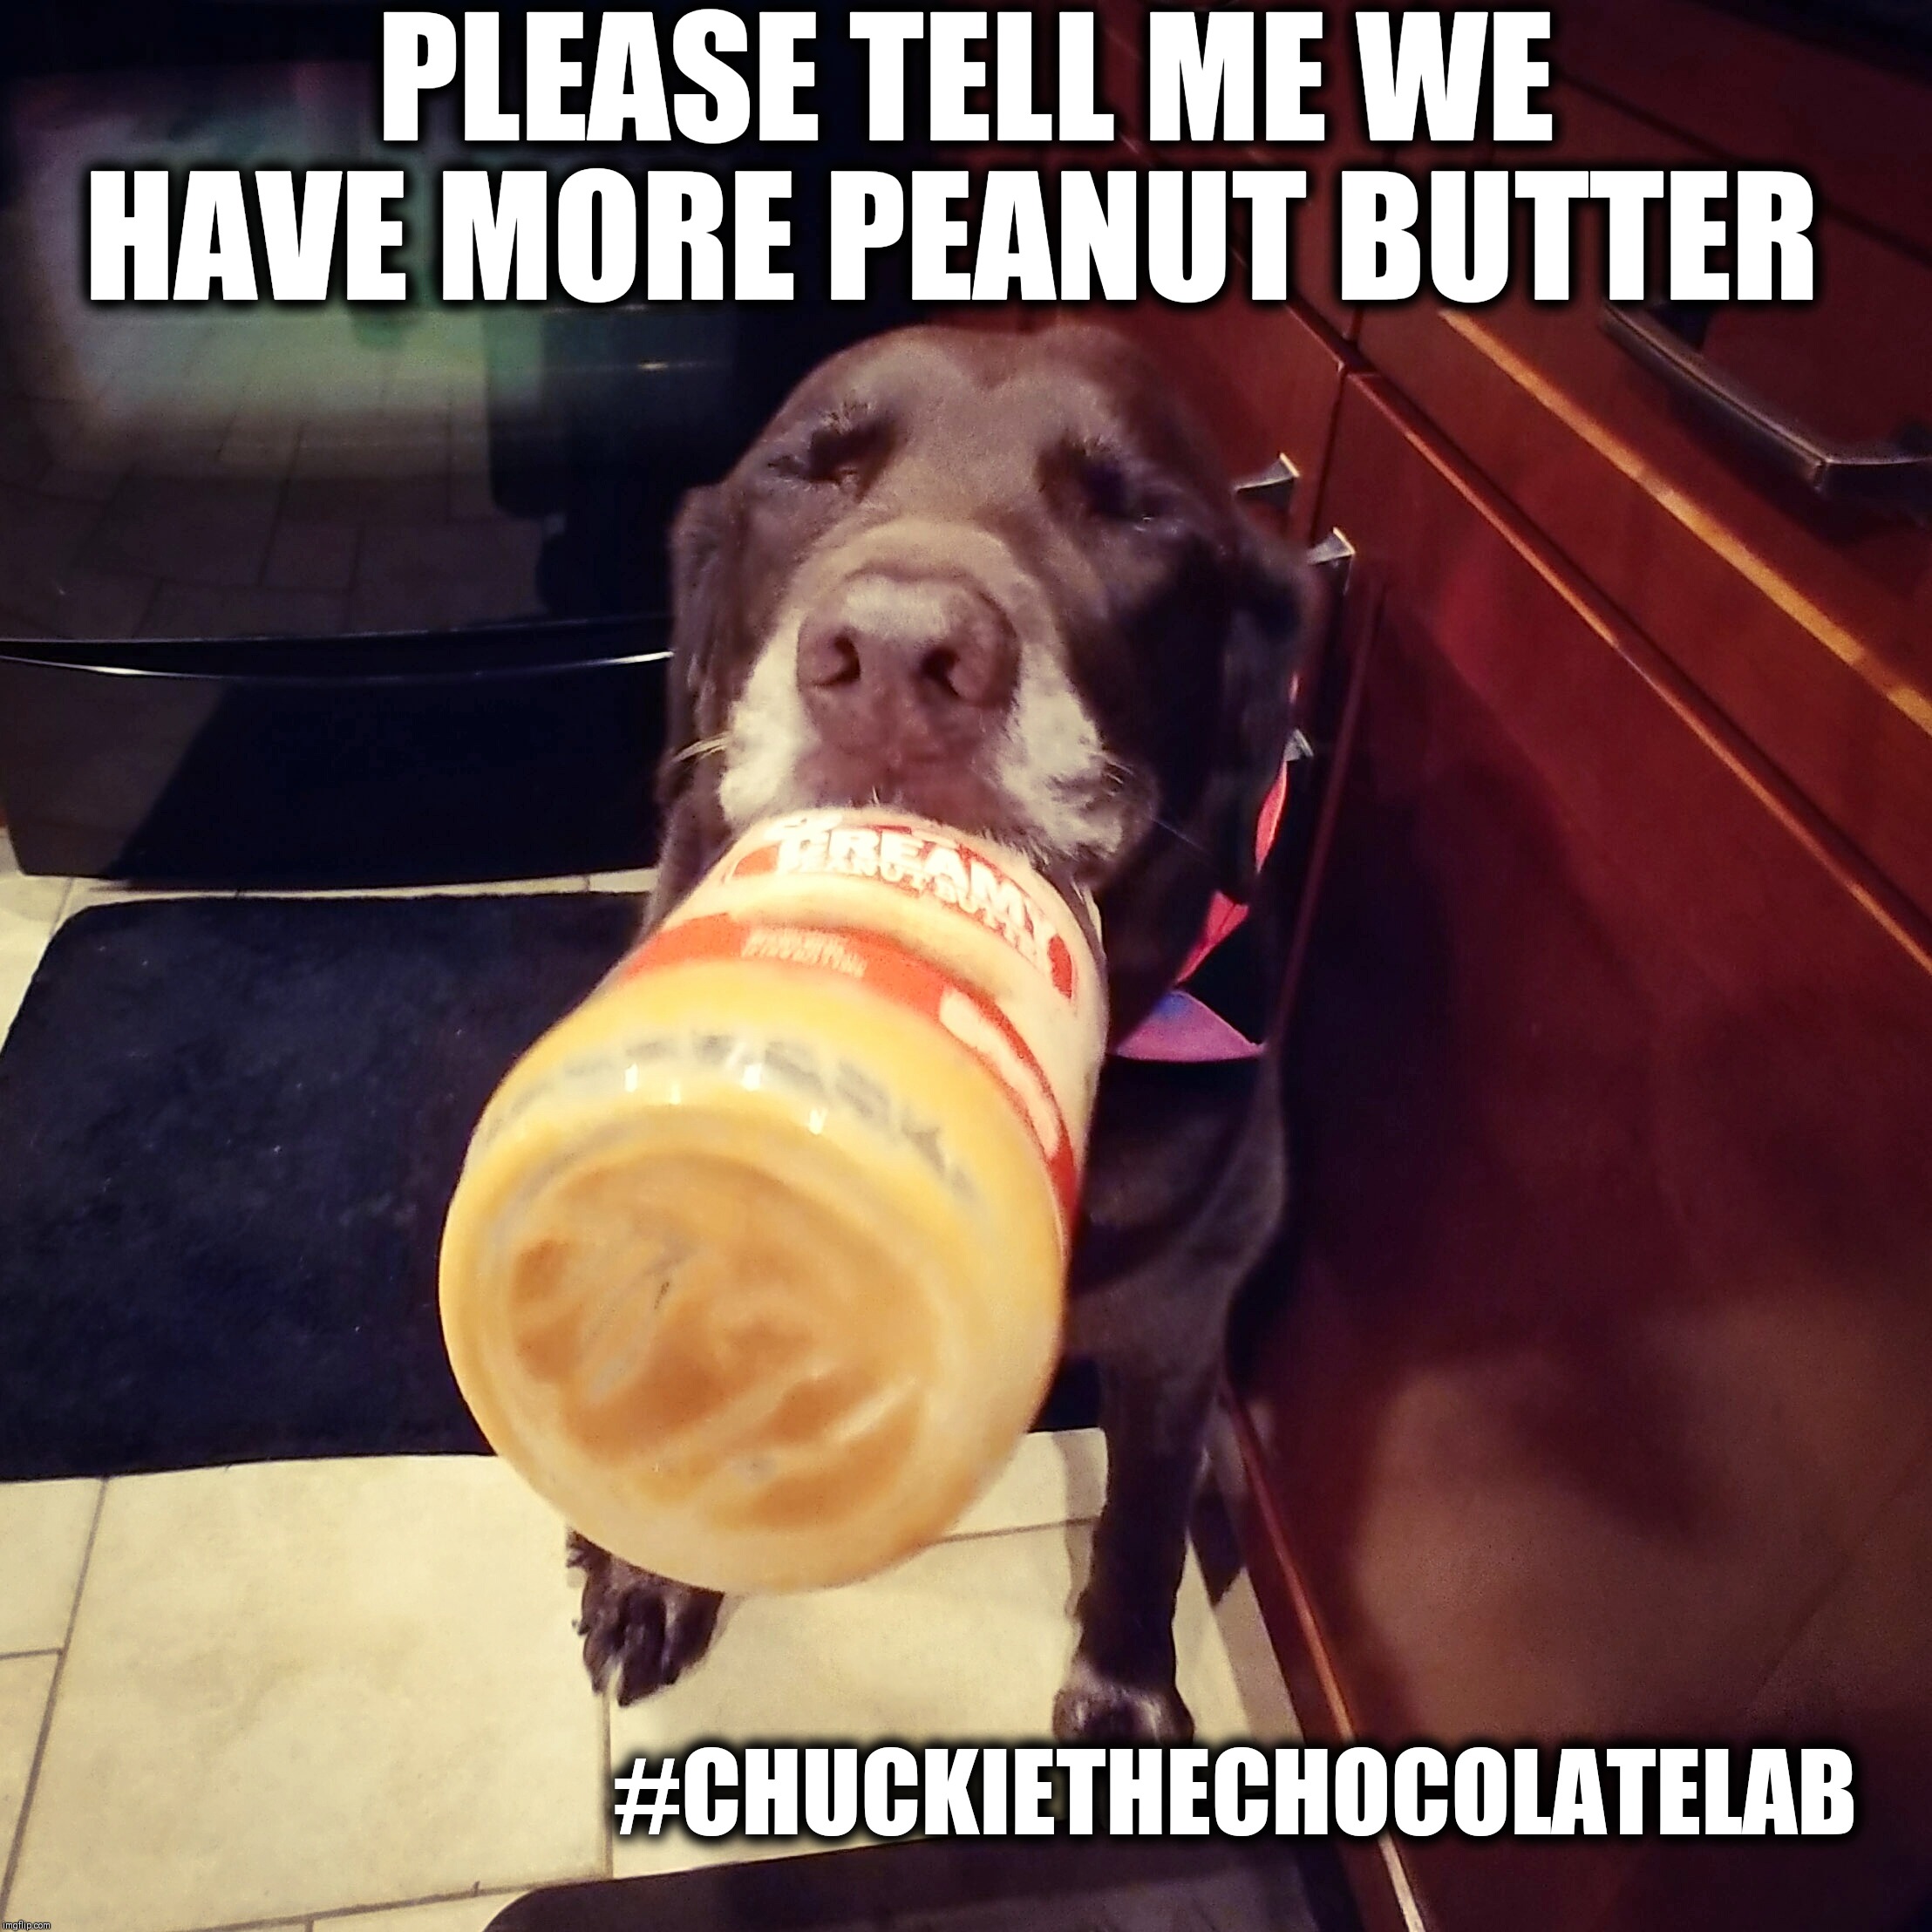 I need peanut butter | PLEASE TELL ME WE HAVE MORE PEANUT BUTTER; #CHUCKIETHECHOCOLATELAB | image tagged in chuckie the chocolate lab,dogs,peanut butter,memes,cute,funny | made w/ Imgflip meme maker